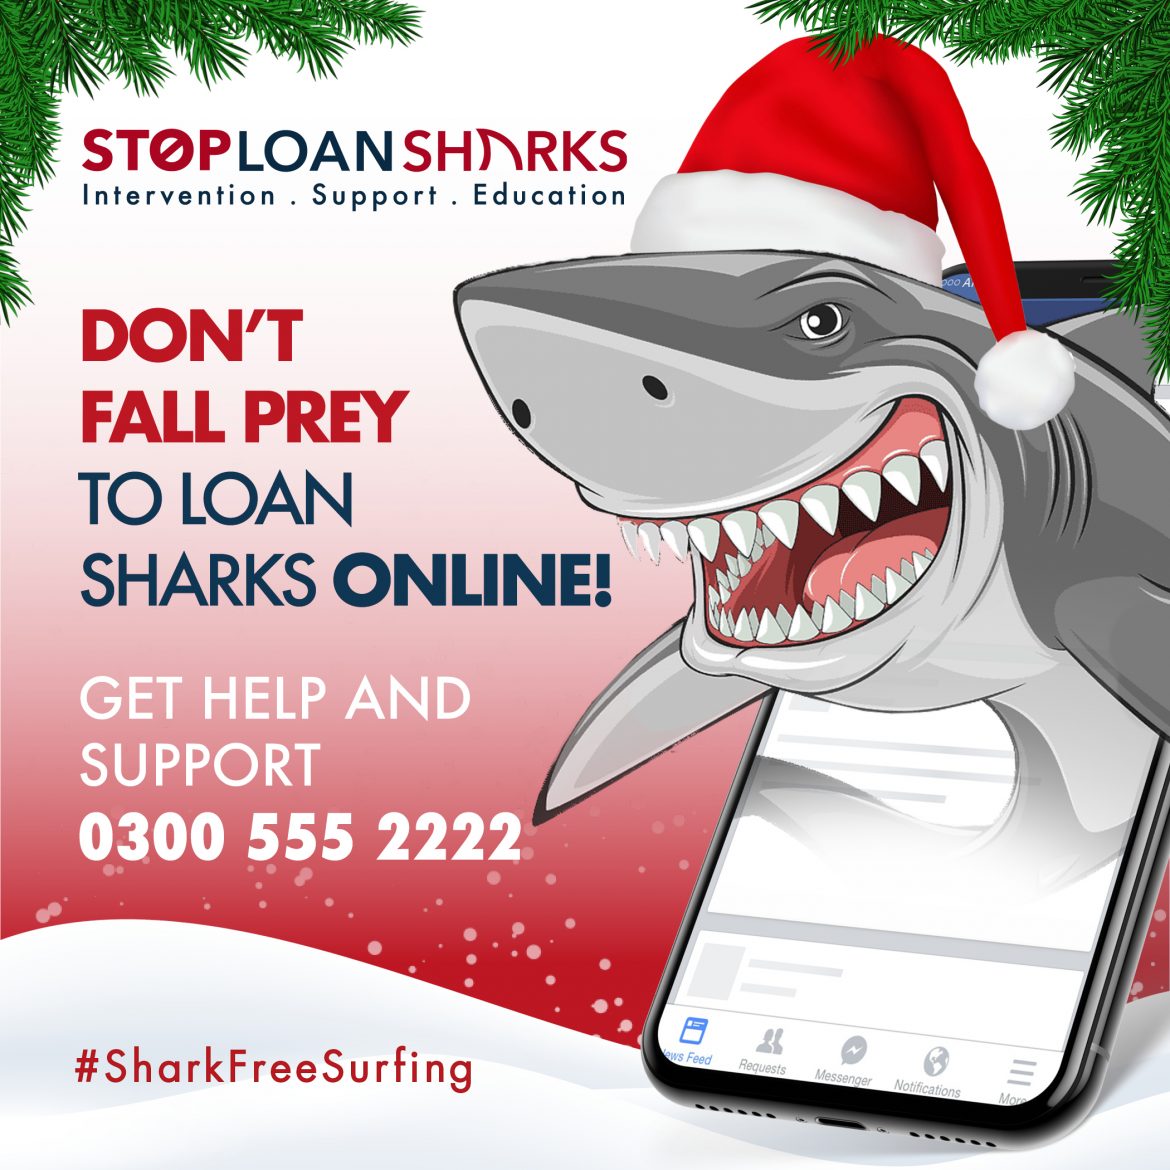 Stop Loan Sharks Week launches campaign to prevent illegal money